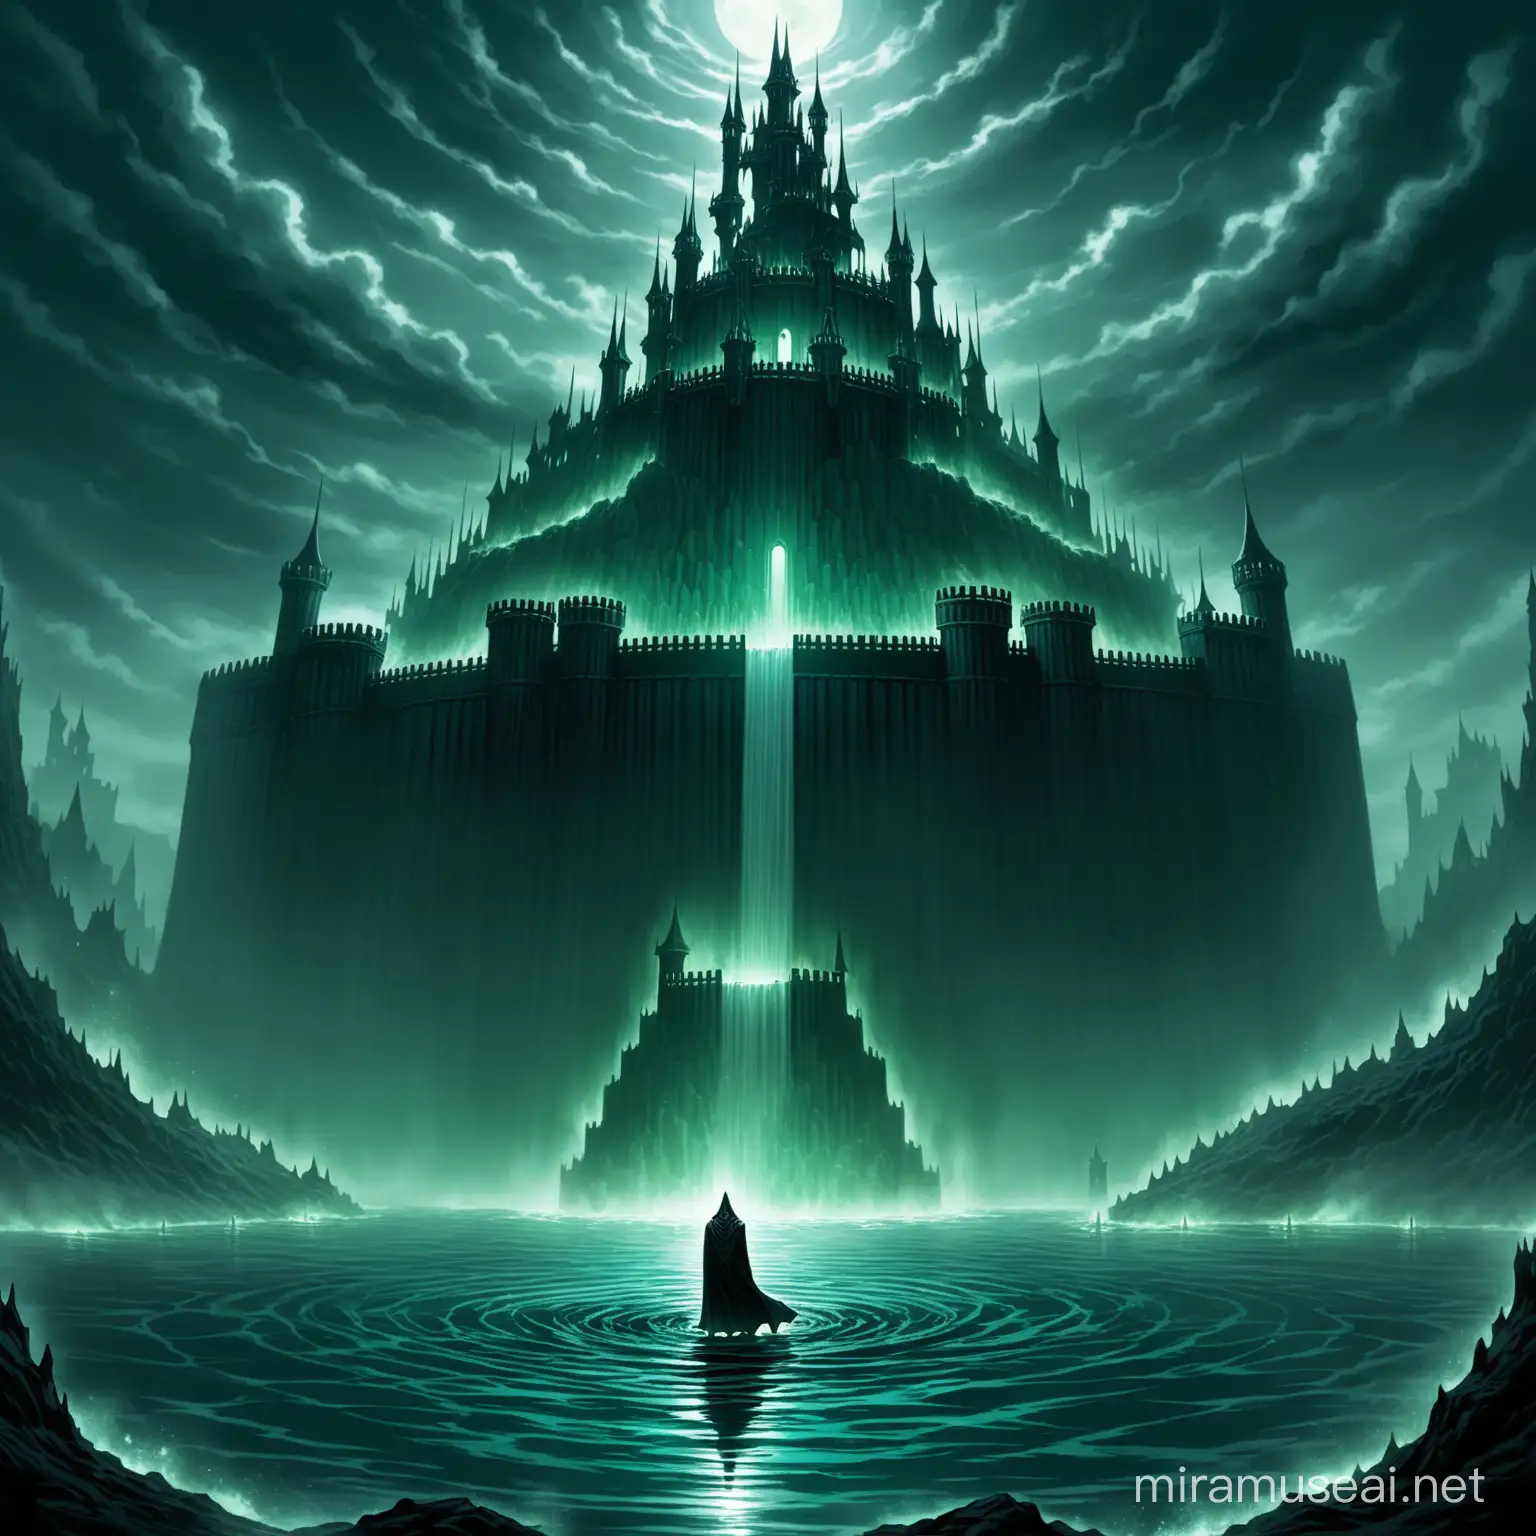 Underworld,, dark, gloomy, characters allowed, castle structure rising, osiris rising from the water, scary, 

